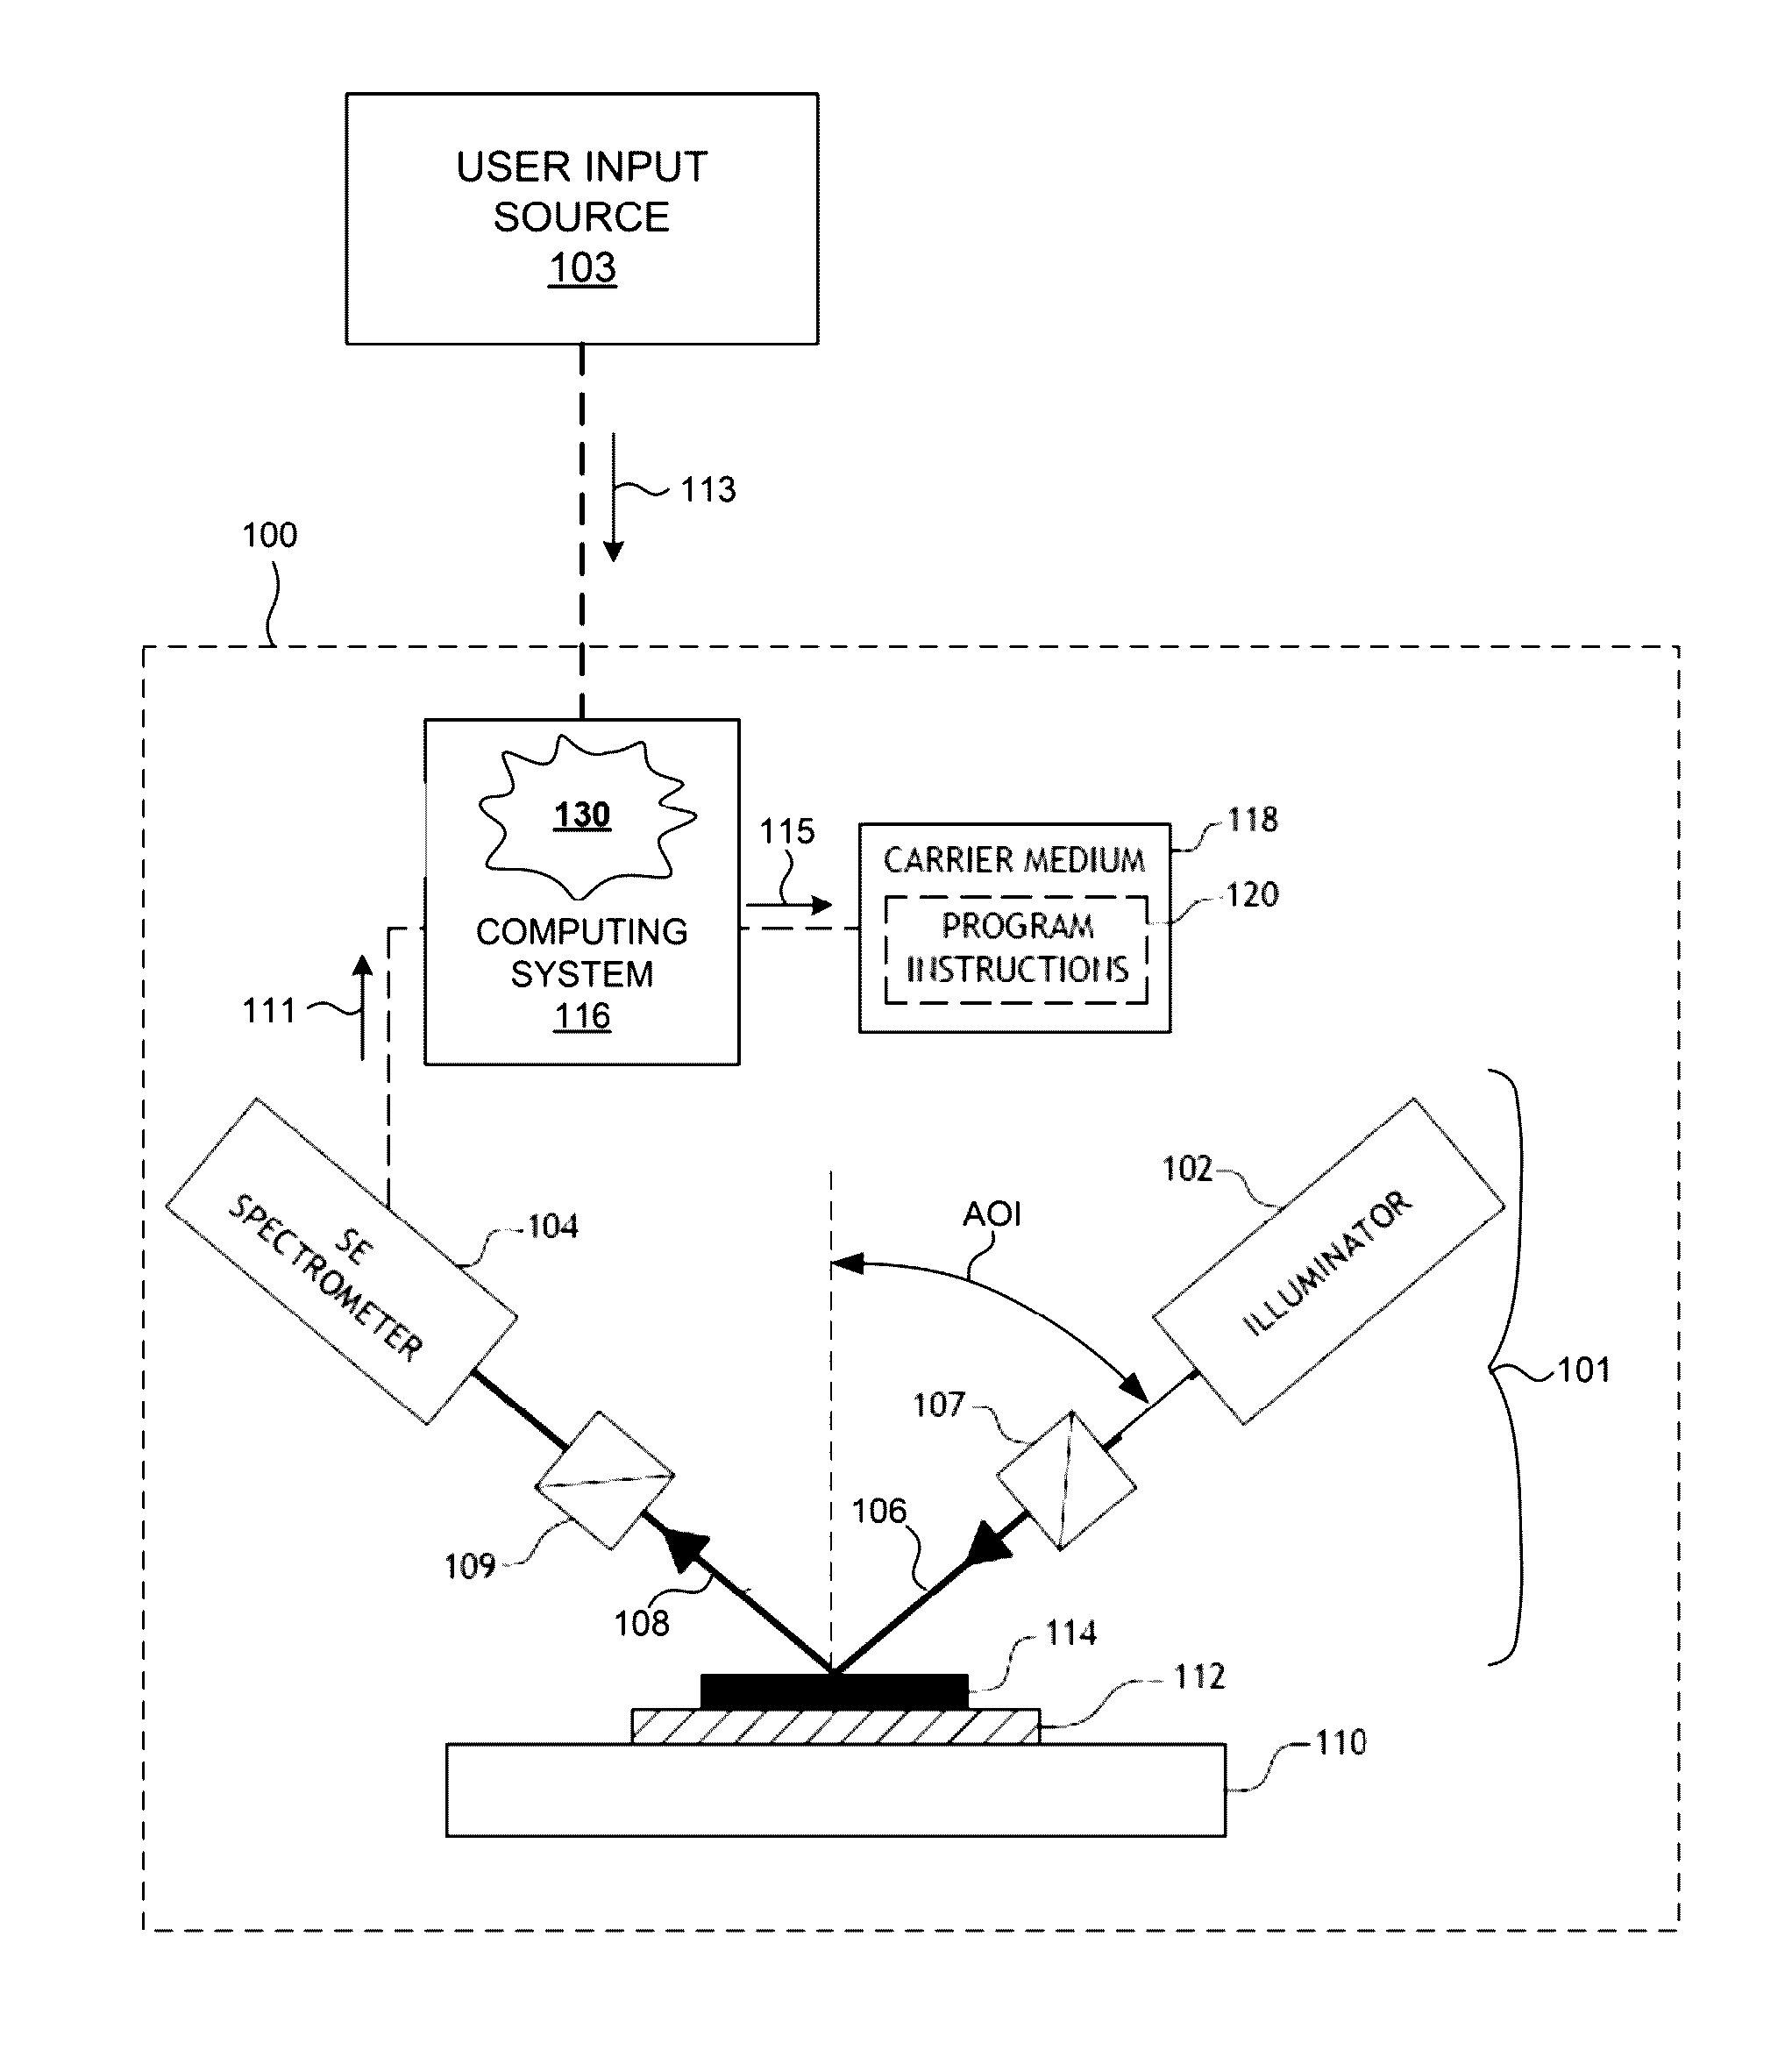 Semiconductor device models including re-usable sub-structures